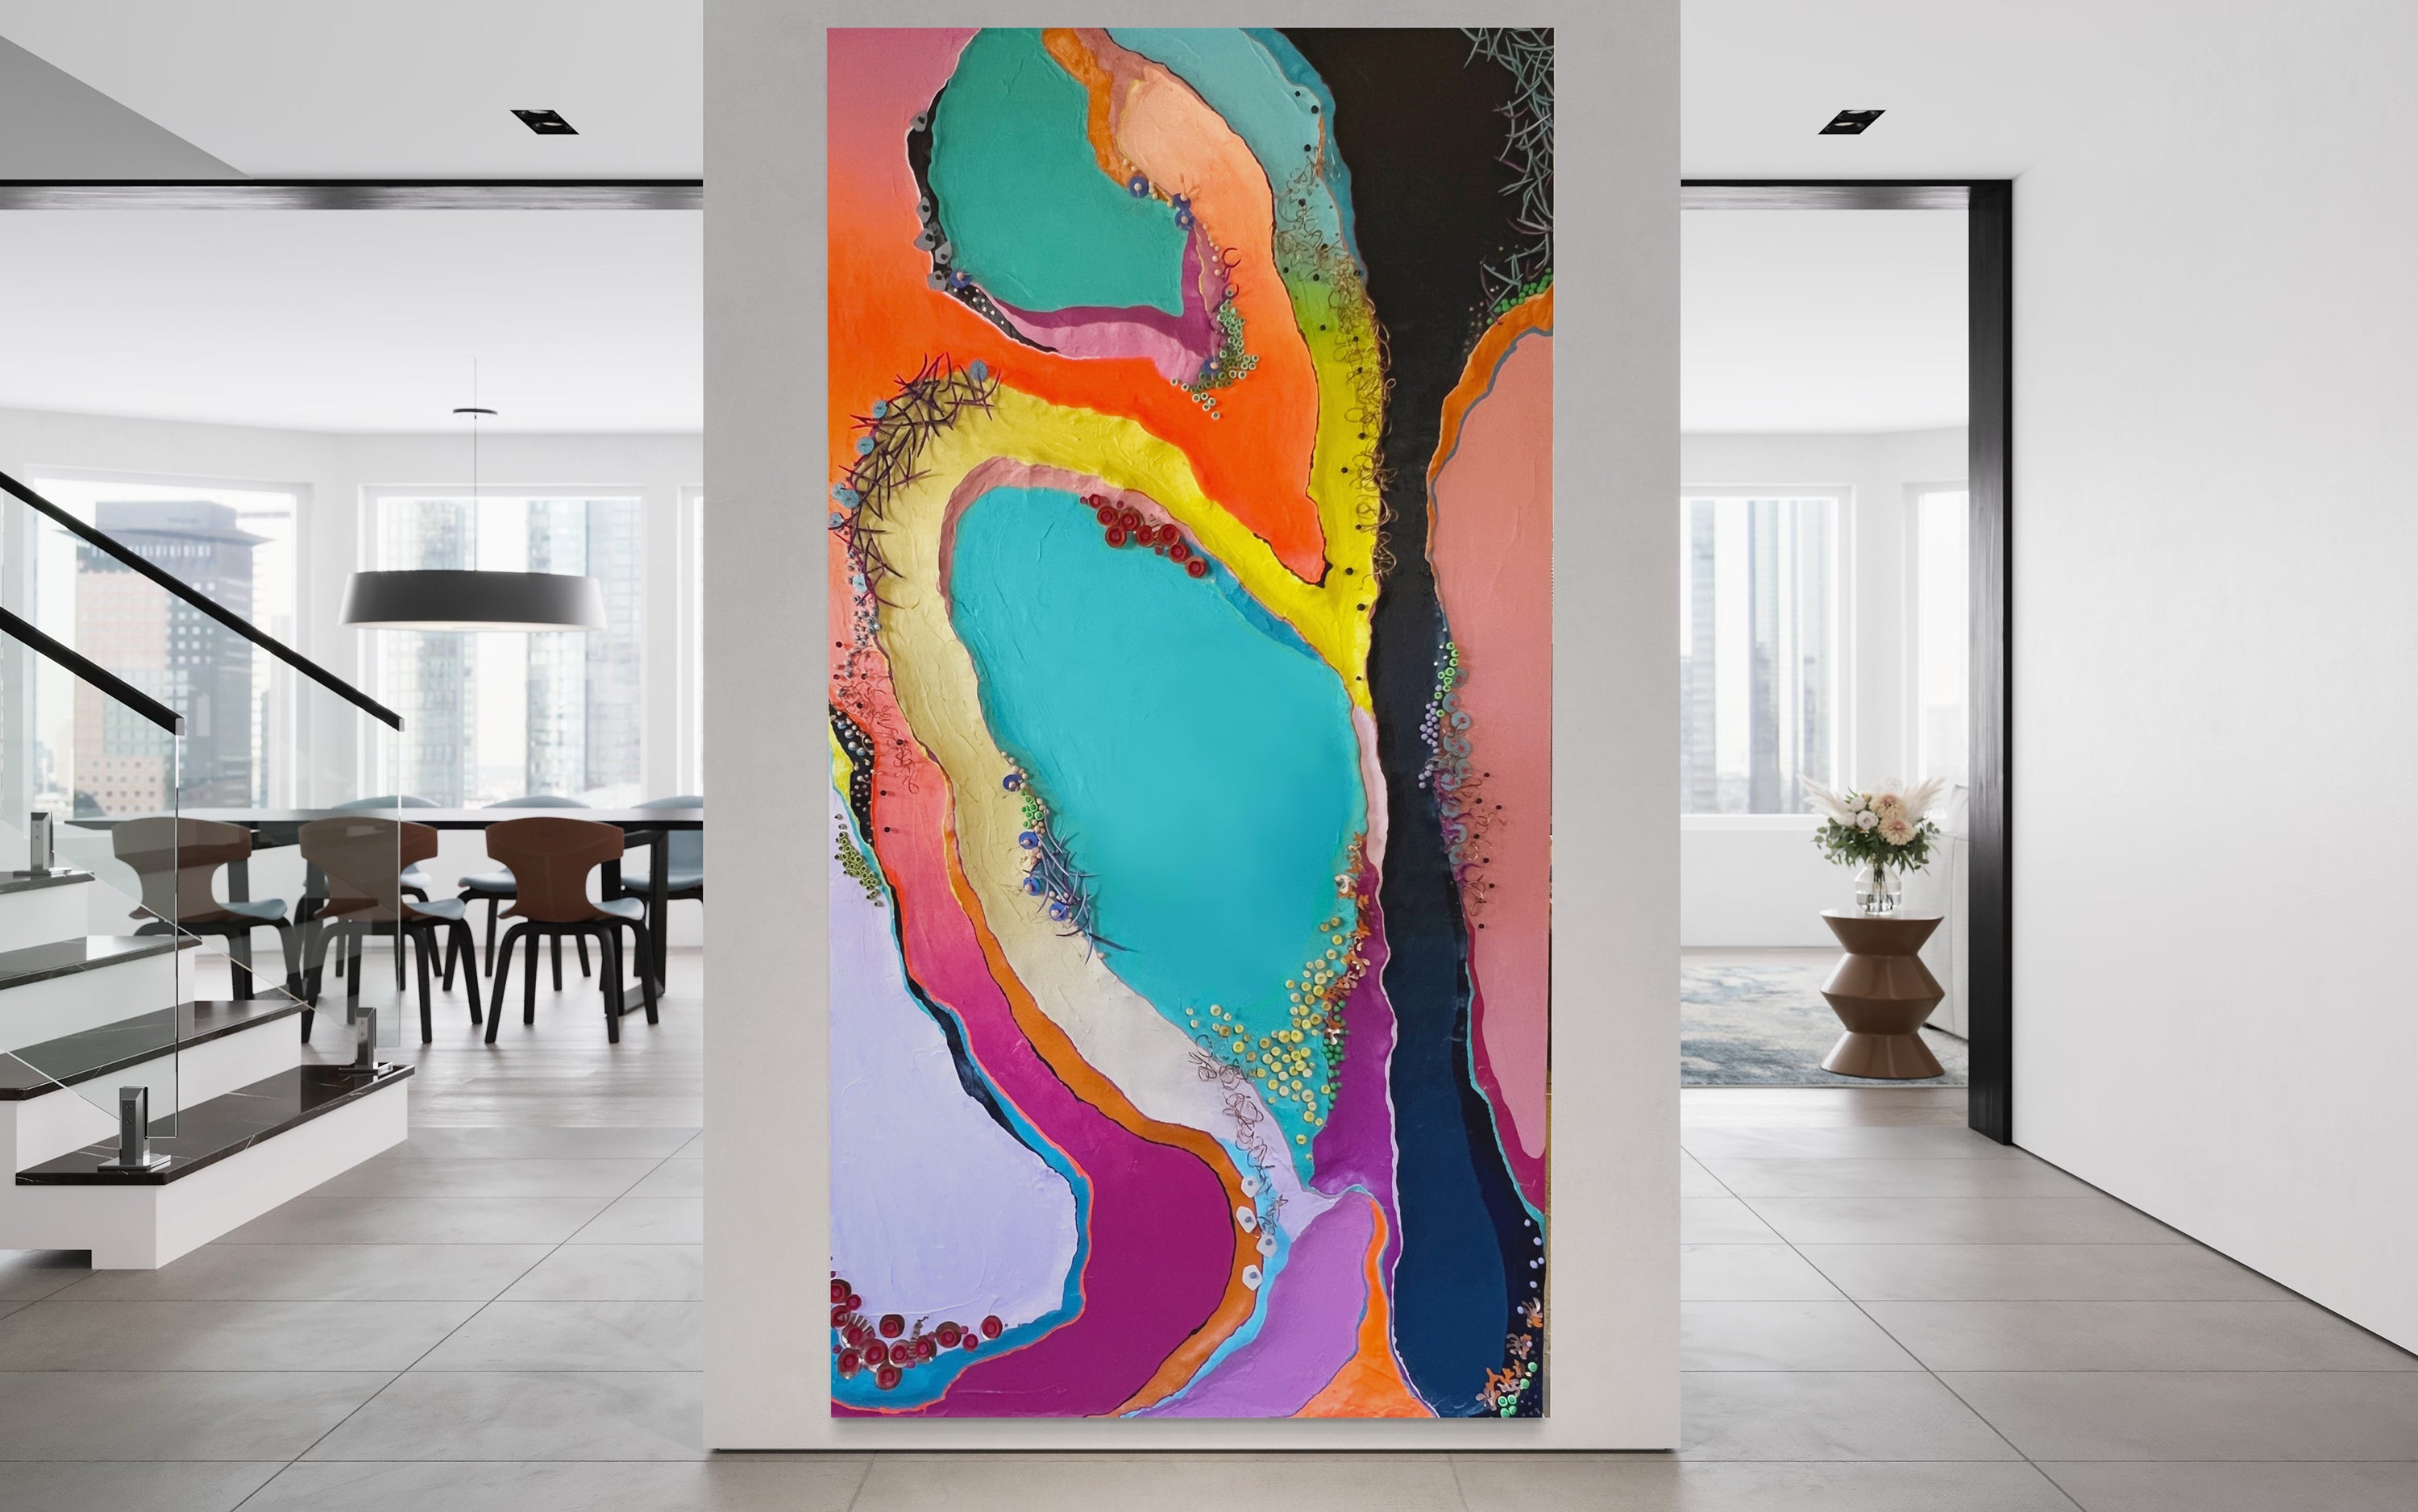 Large colorful abstract sculptural mural on an office wall that is 12x8 feet in size